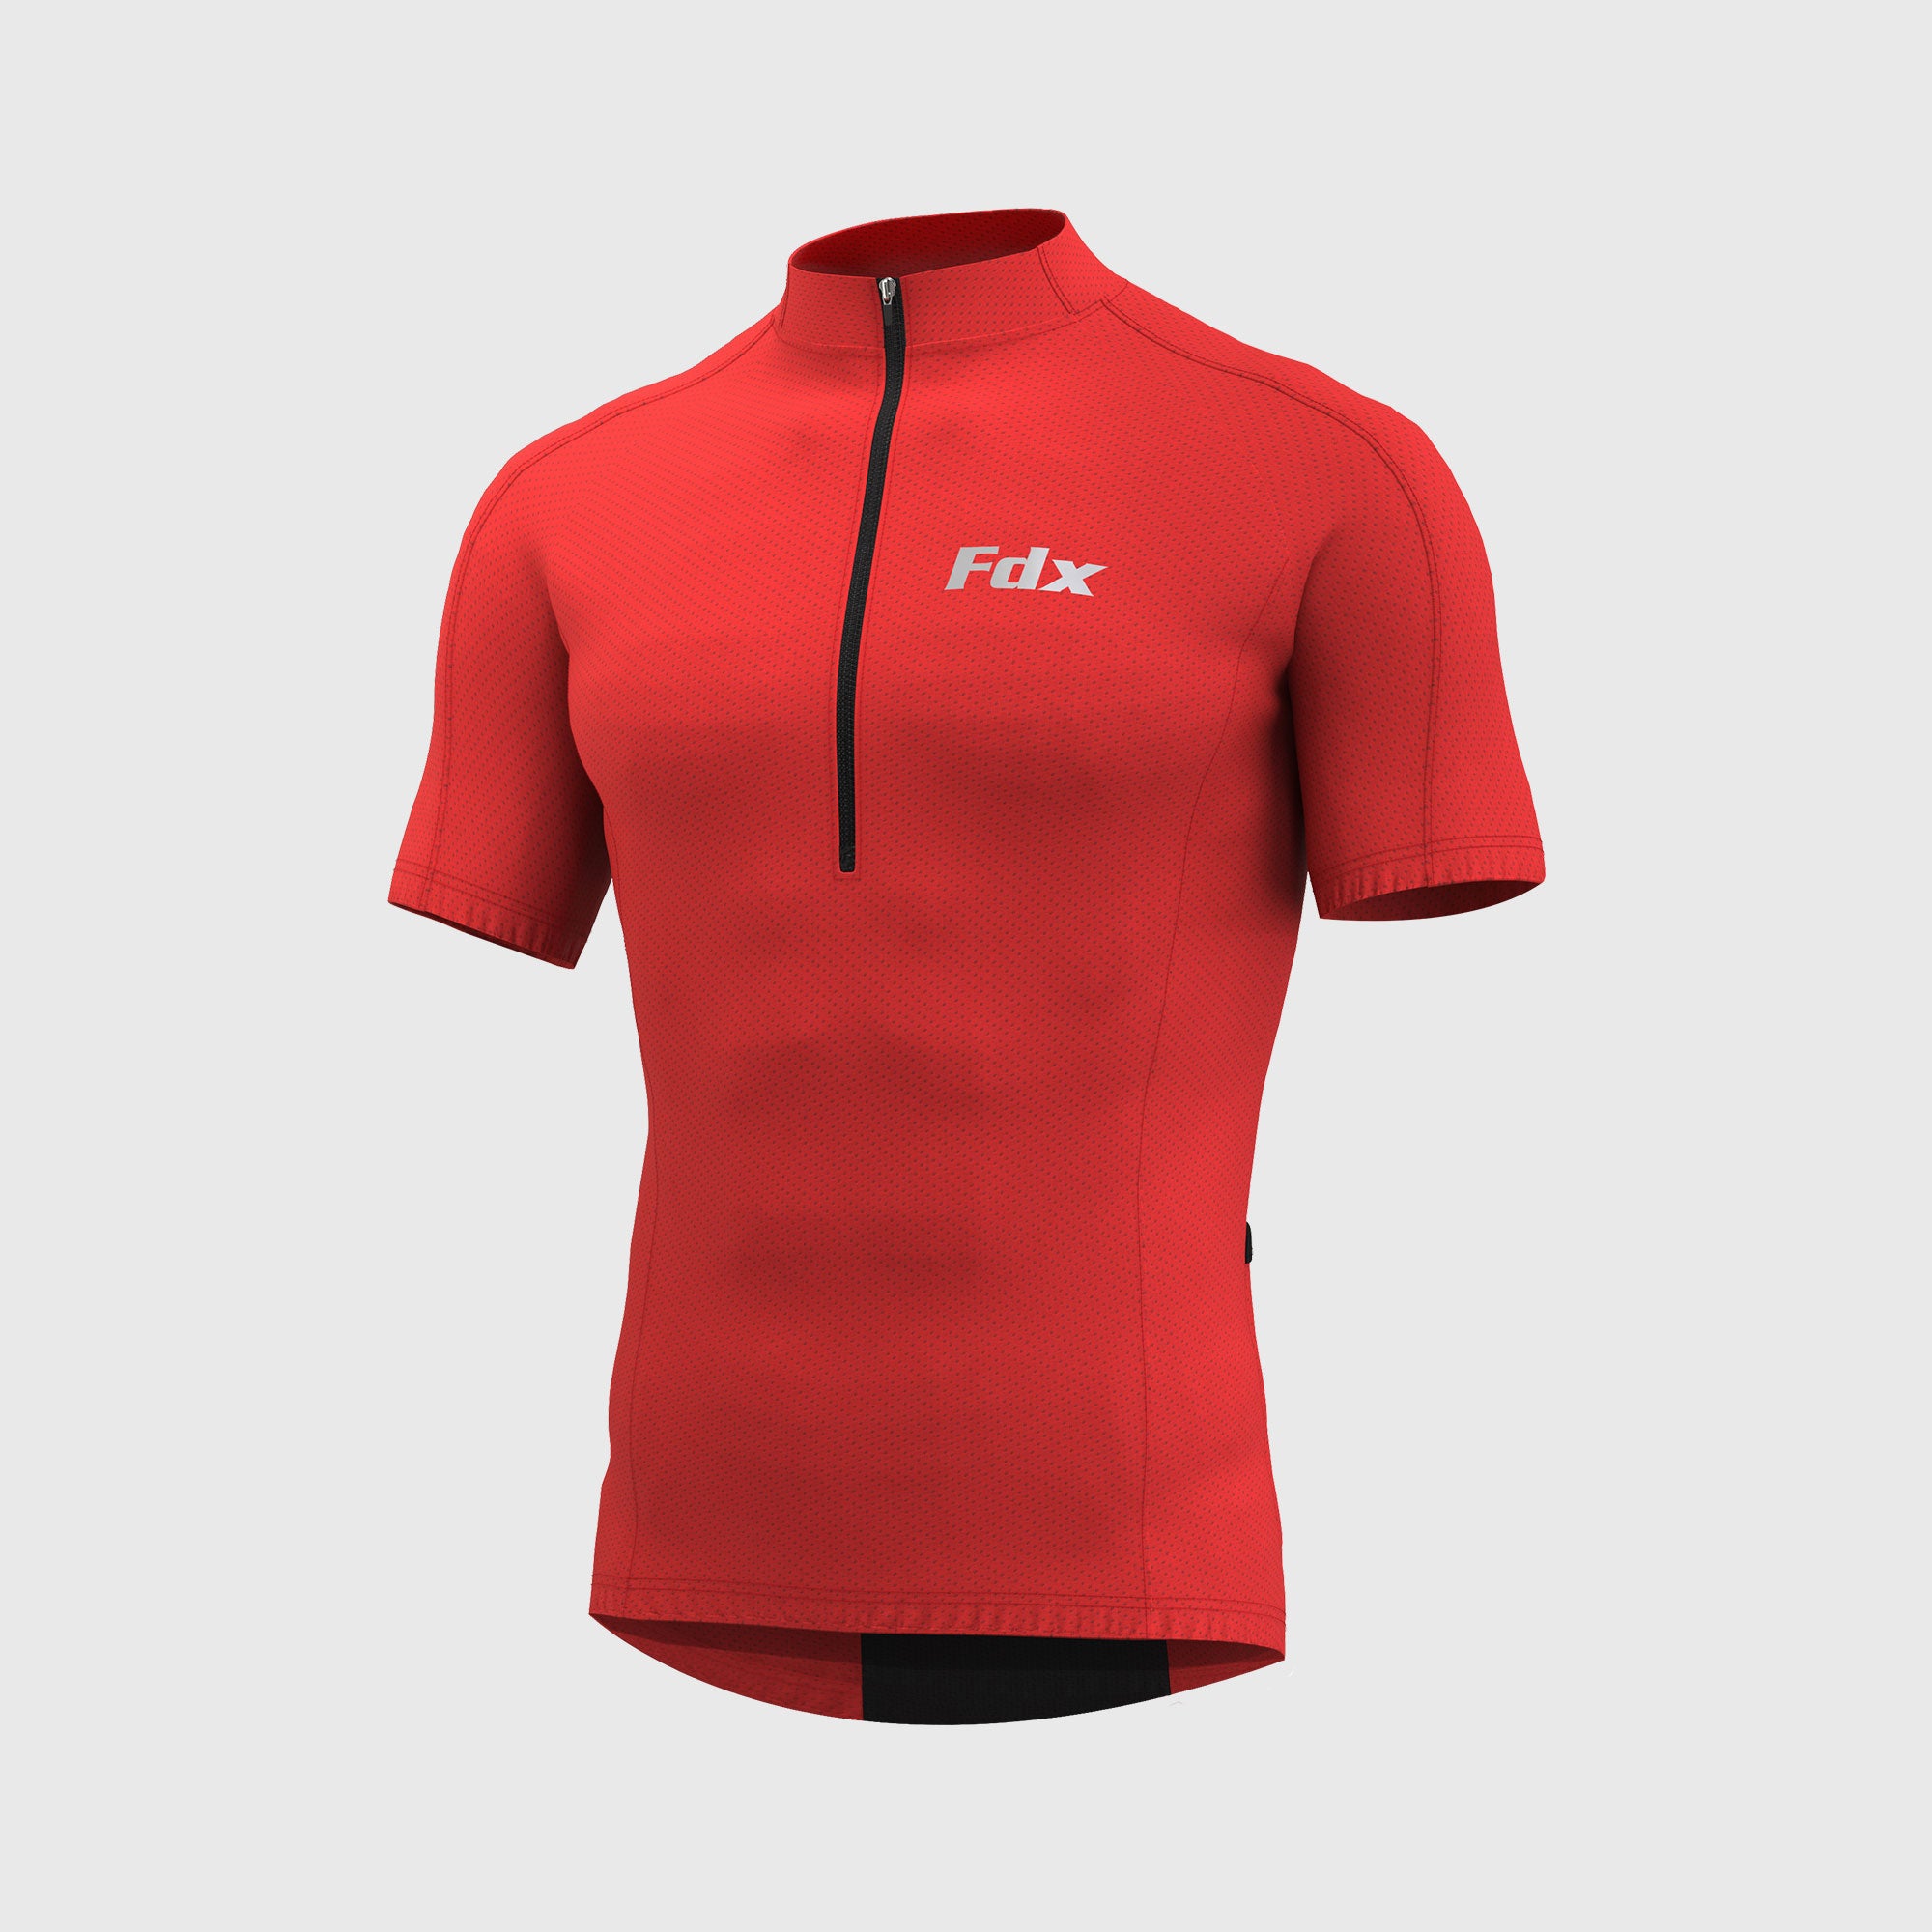 Fdx Pace Red Men's Short Sleeve Summer Cycling Jersey